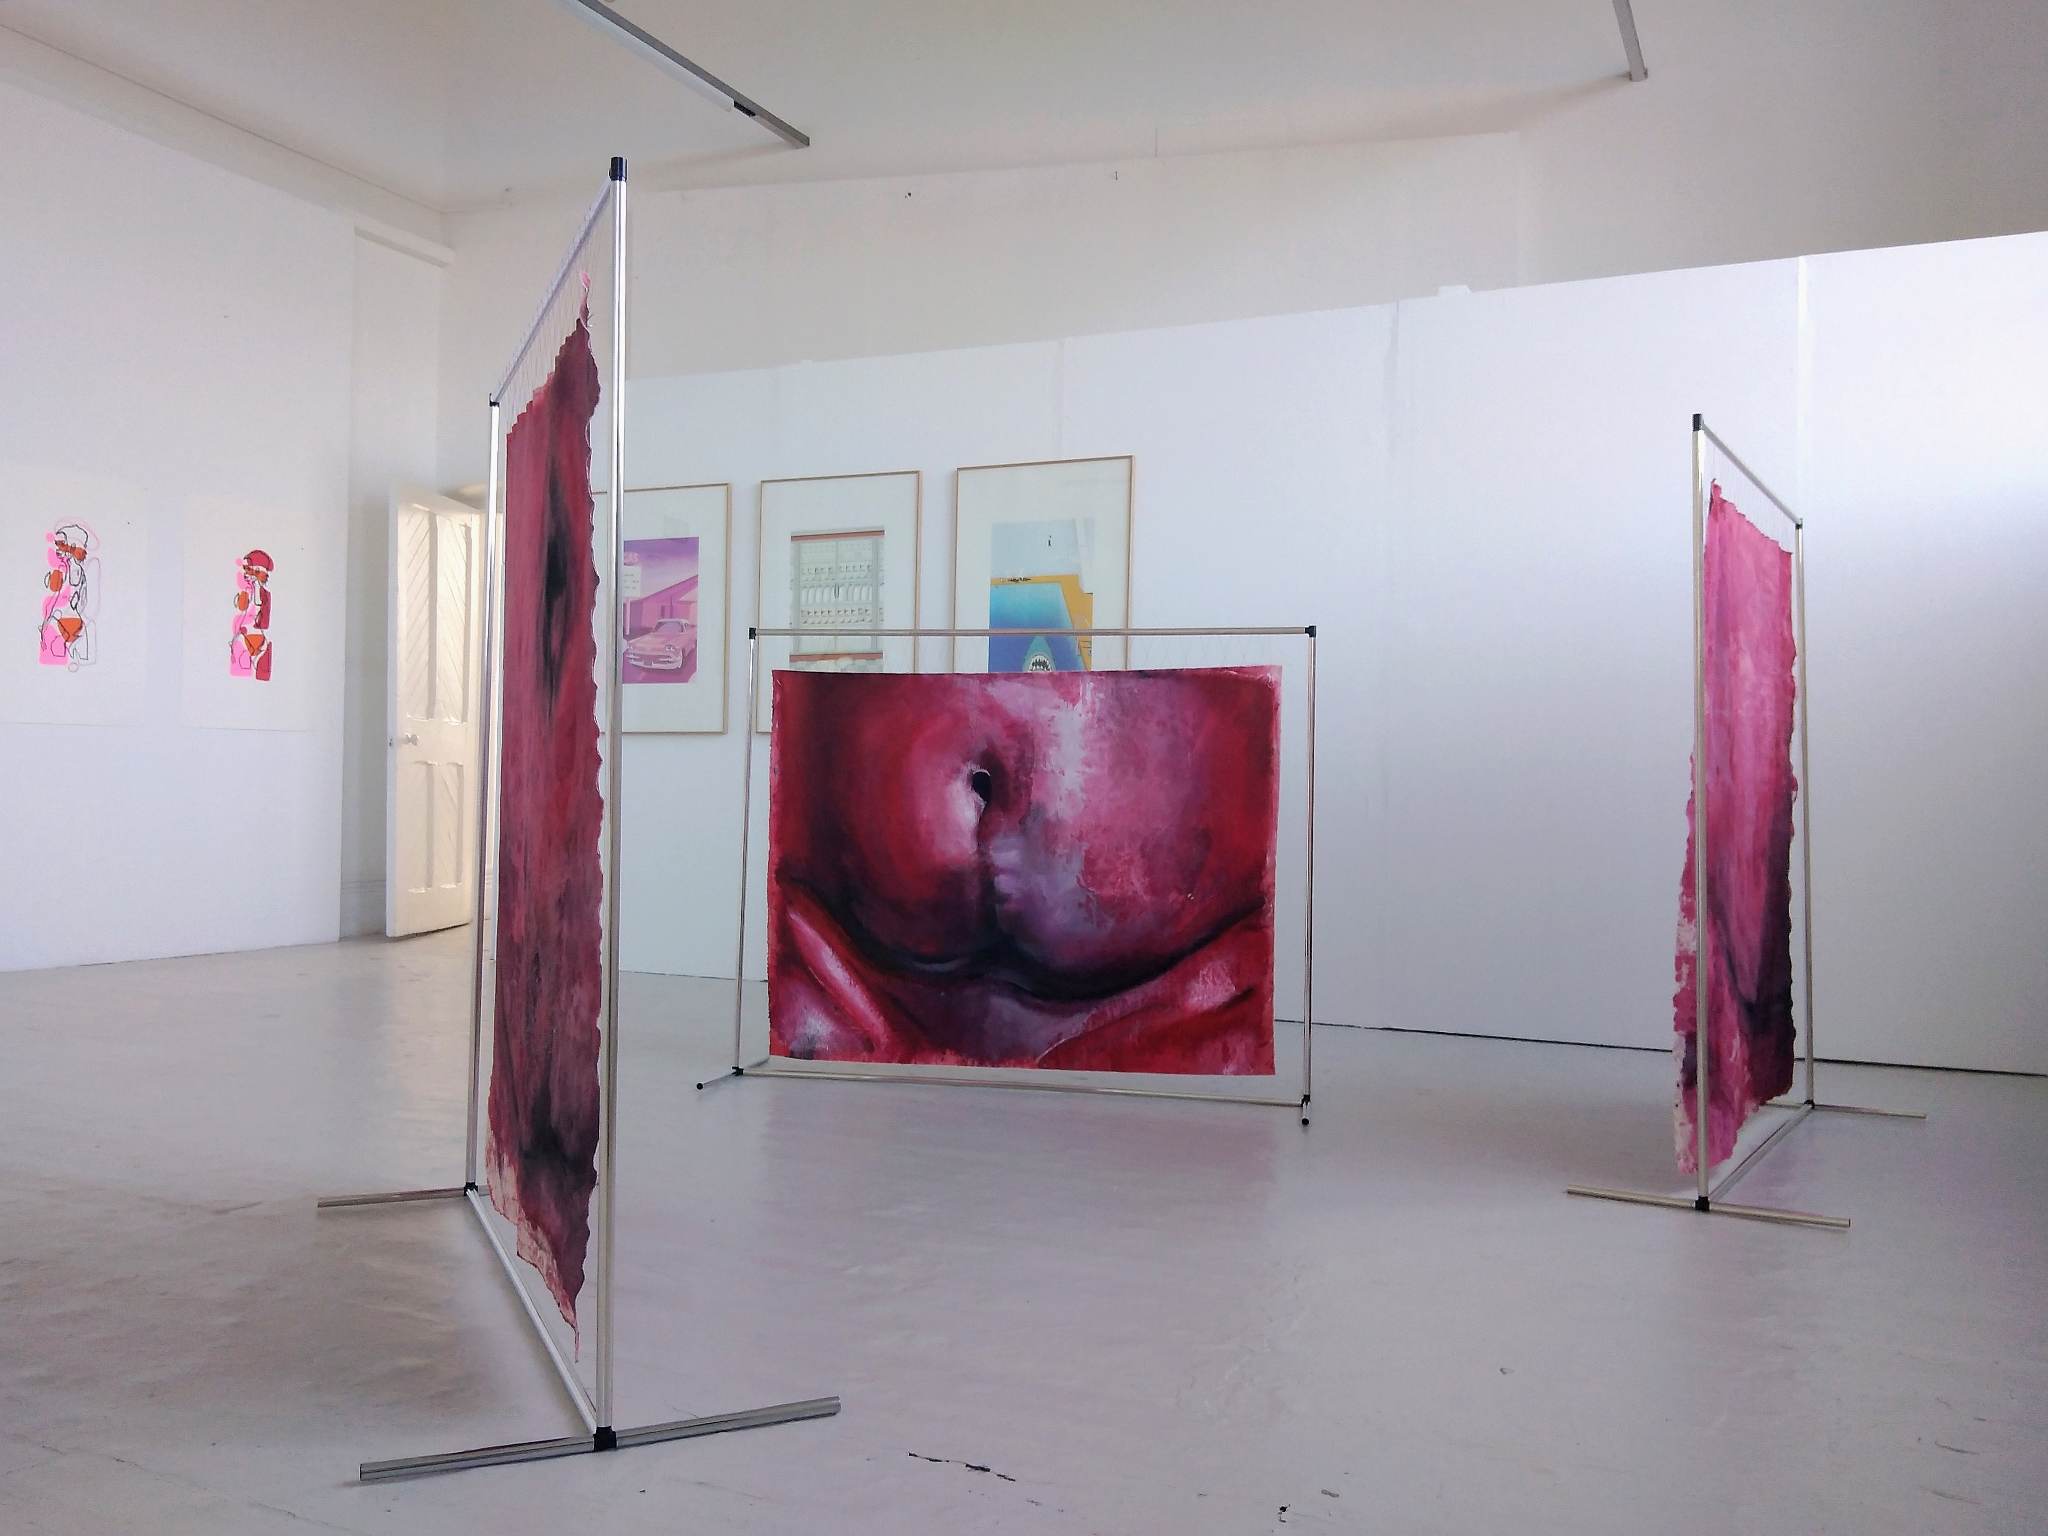 Artwork by Clare Gregory featuring three large, red pieces on canvas displaying close-ups of the abdomen. These are suspended from freestanding, aluminium frames.